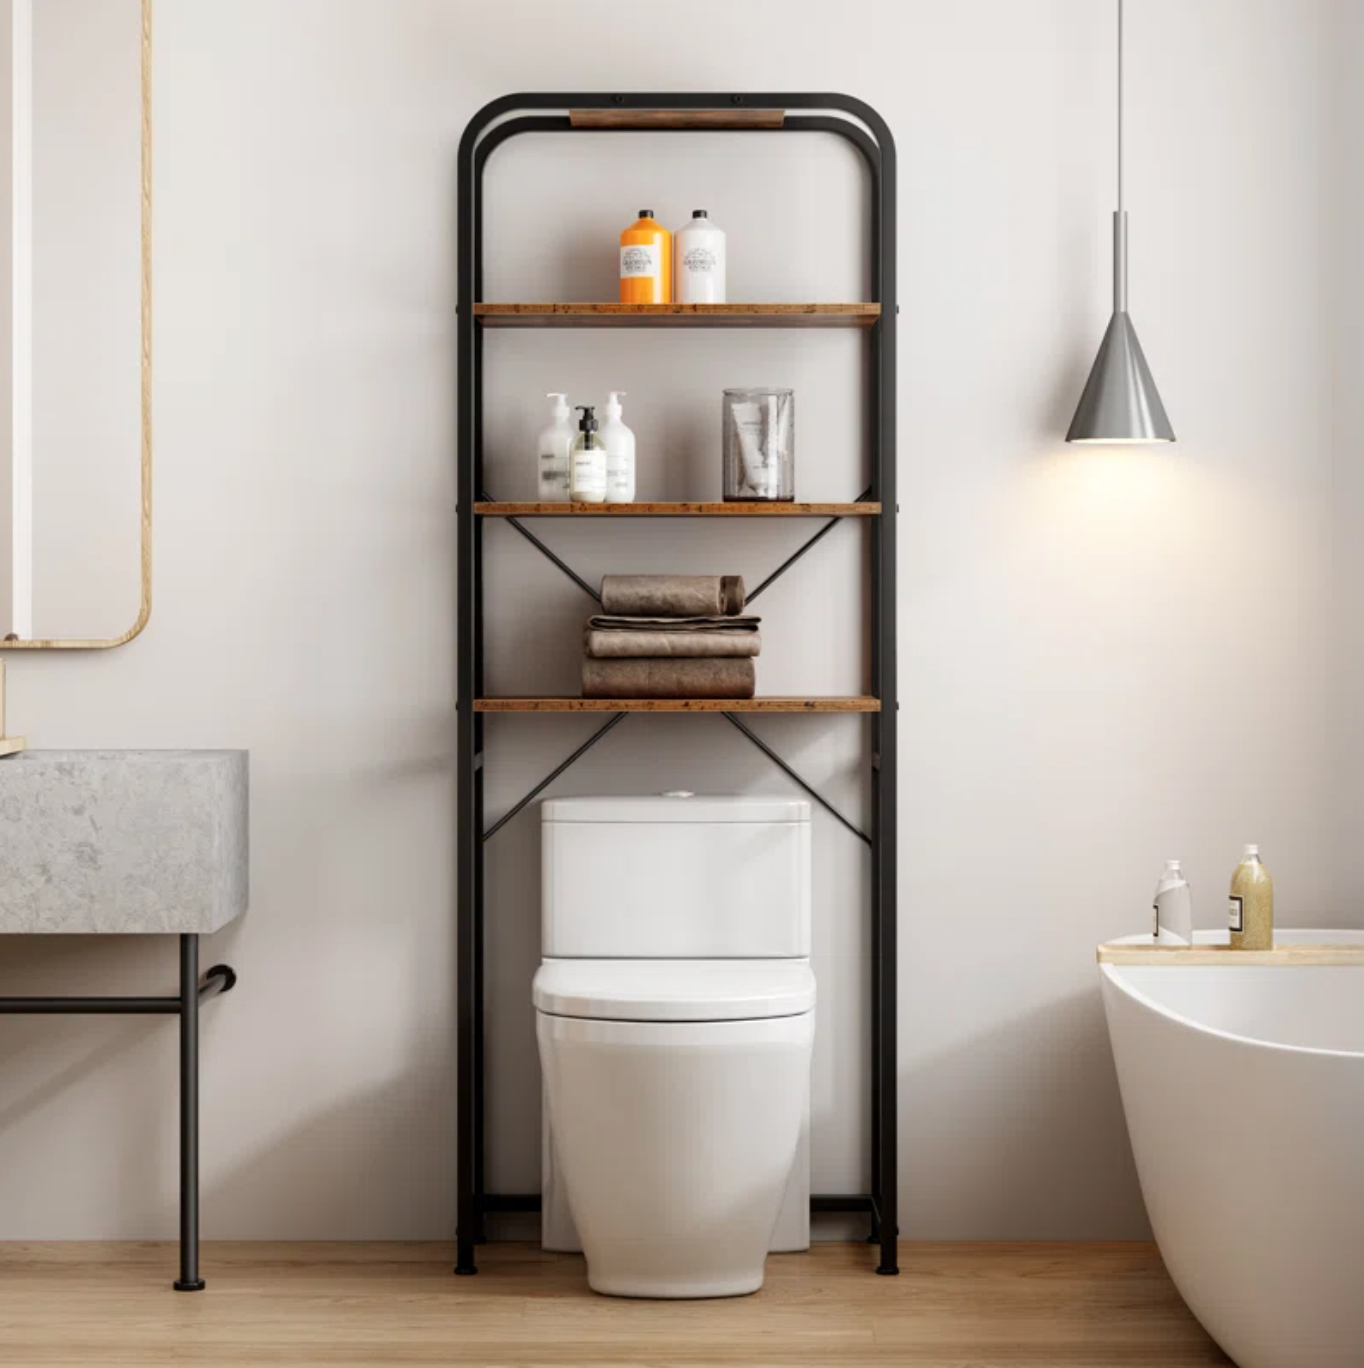 An over-the-toilet shelf with a black frame